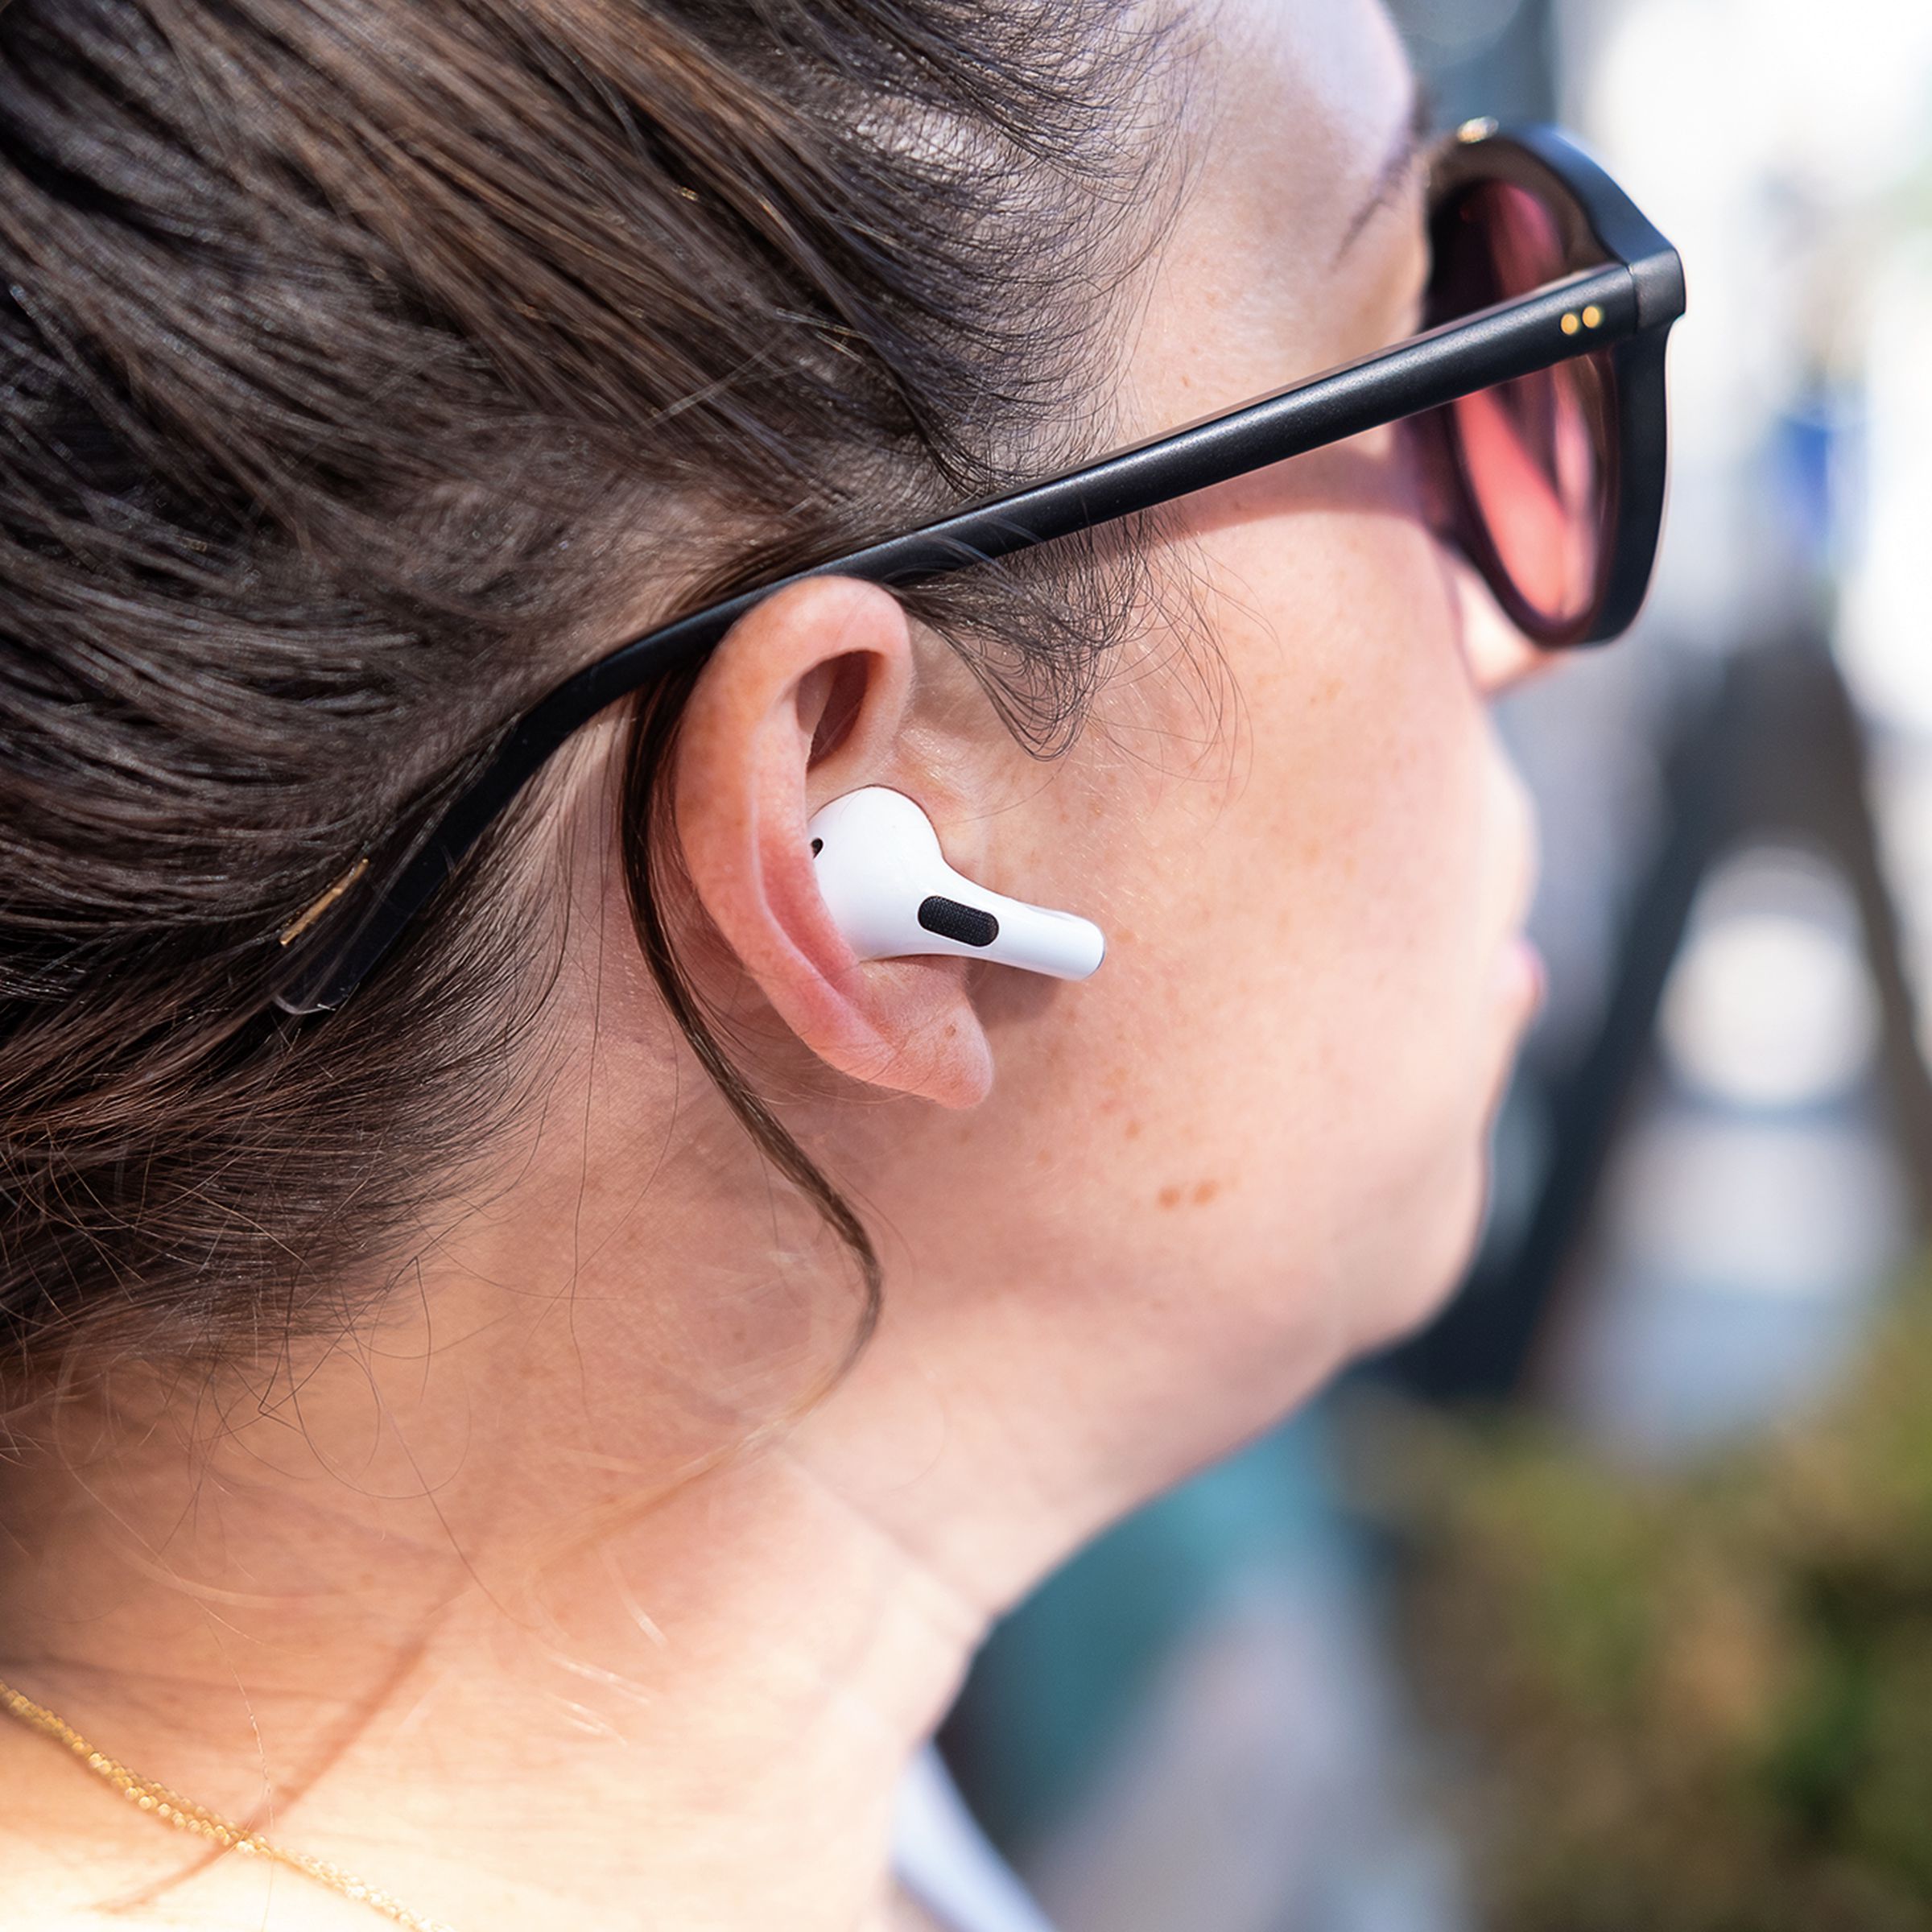 Apple’s second-generation AirPods Pro pictured in a side profile photo of a woman’s head.